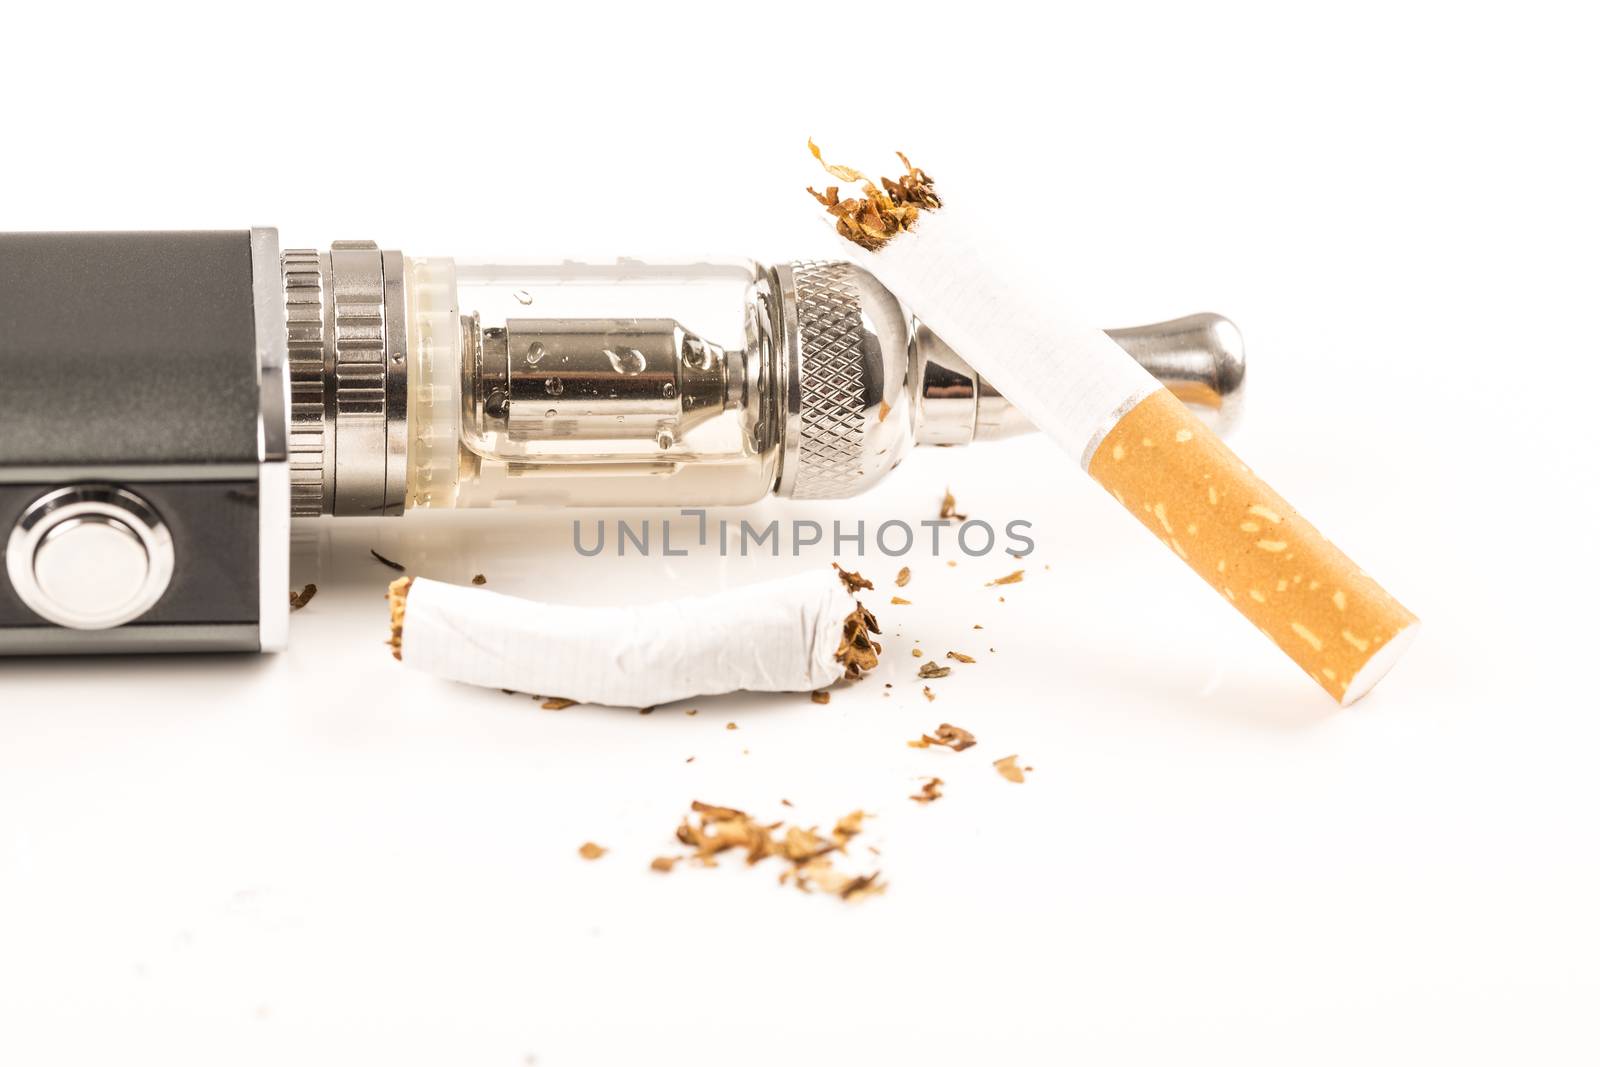 electronic cigarettes and tabacco on white background by CatherineL-Prod